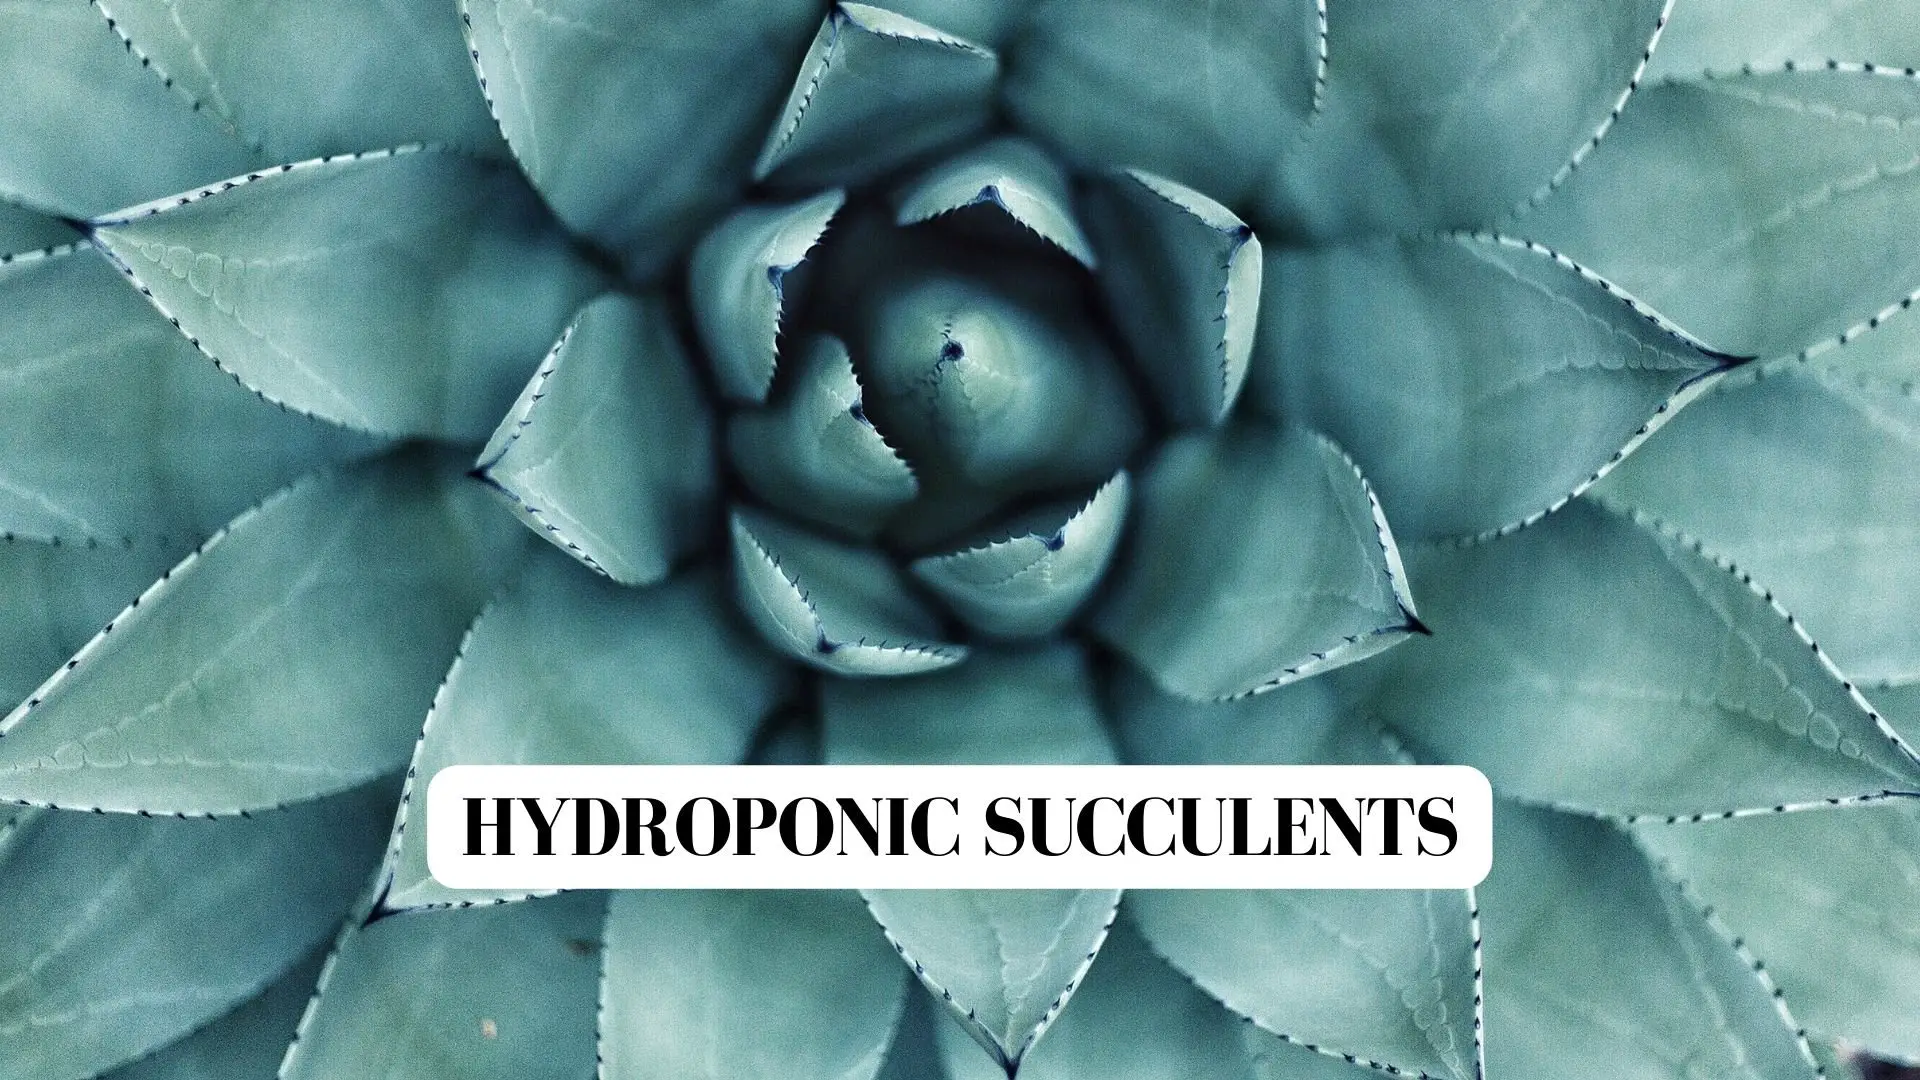 % Learn how to grow succulents anywhere in your home using a hydroponic system!